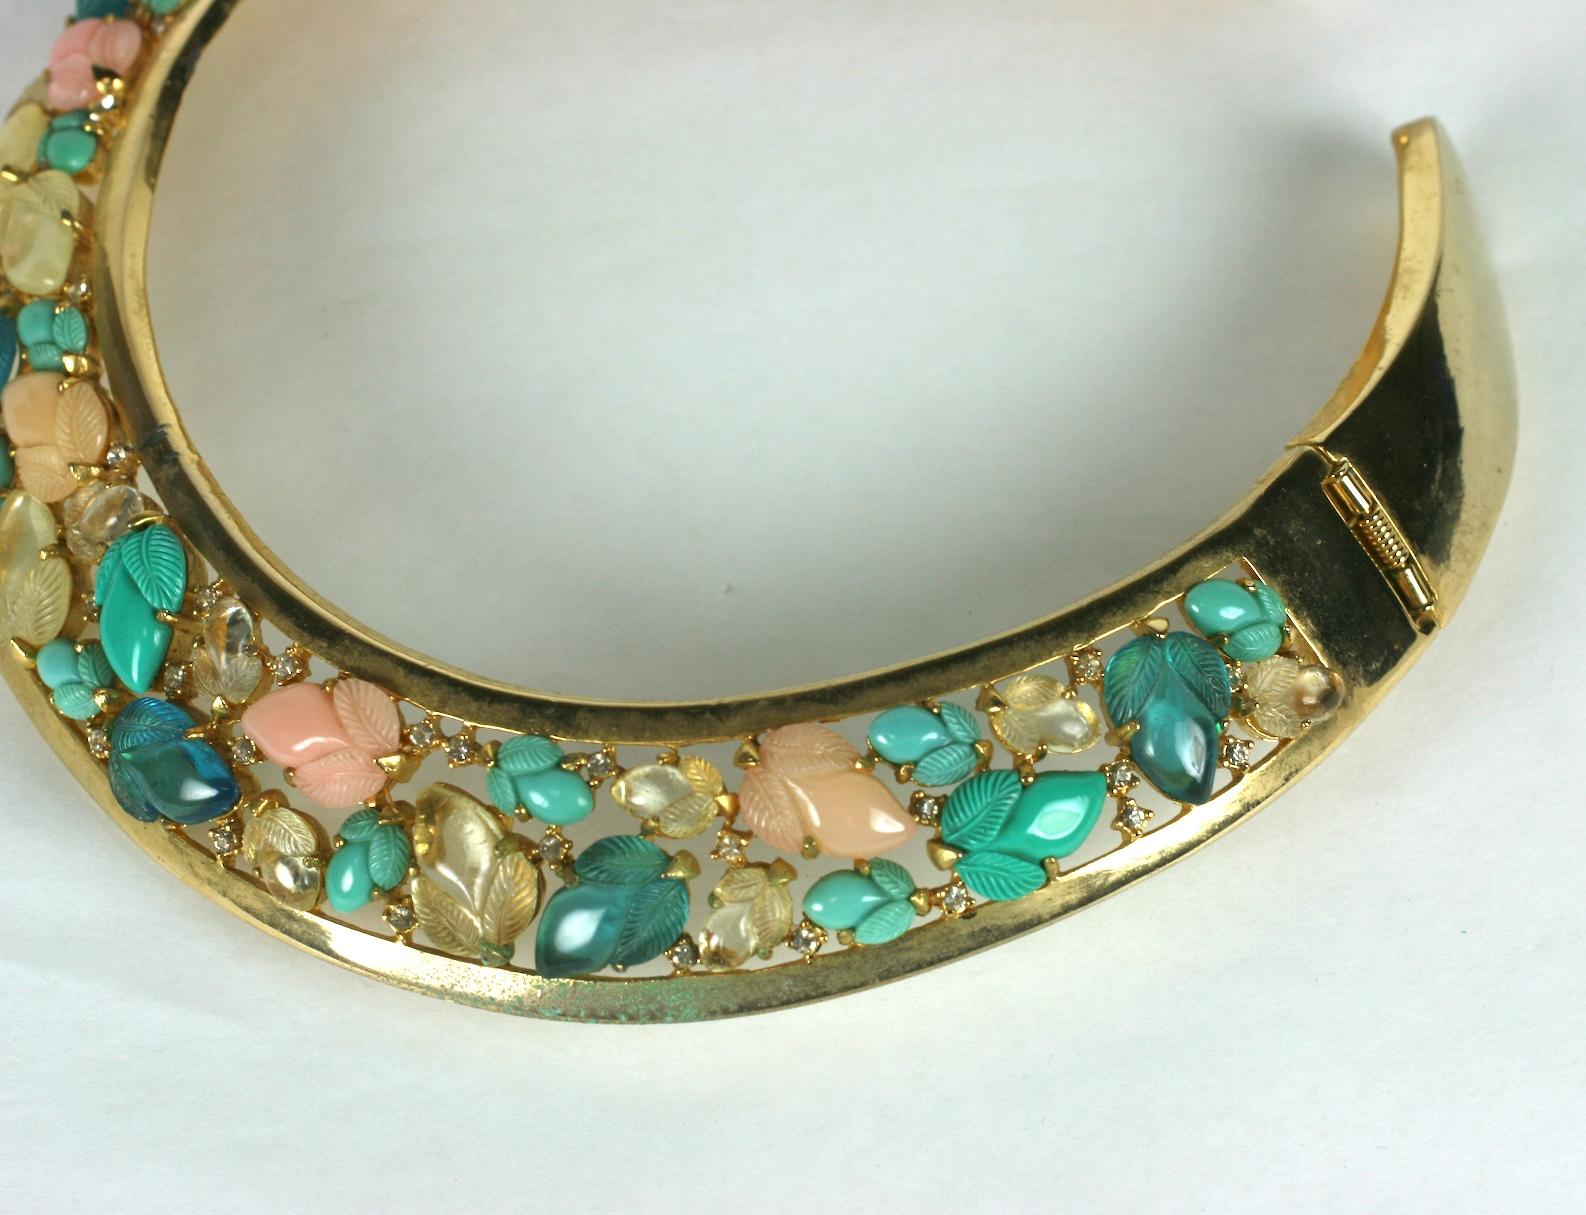 Unusual Pastel Fruit Salad rigid collar incorporating Trifari fruit salad cabochons from the 1980's. This design was made by Lanvin but there are no markings. A pair of hinges on back allows entry. 
Crystal carved stones in moonstone, turquoise,